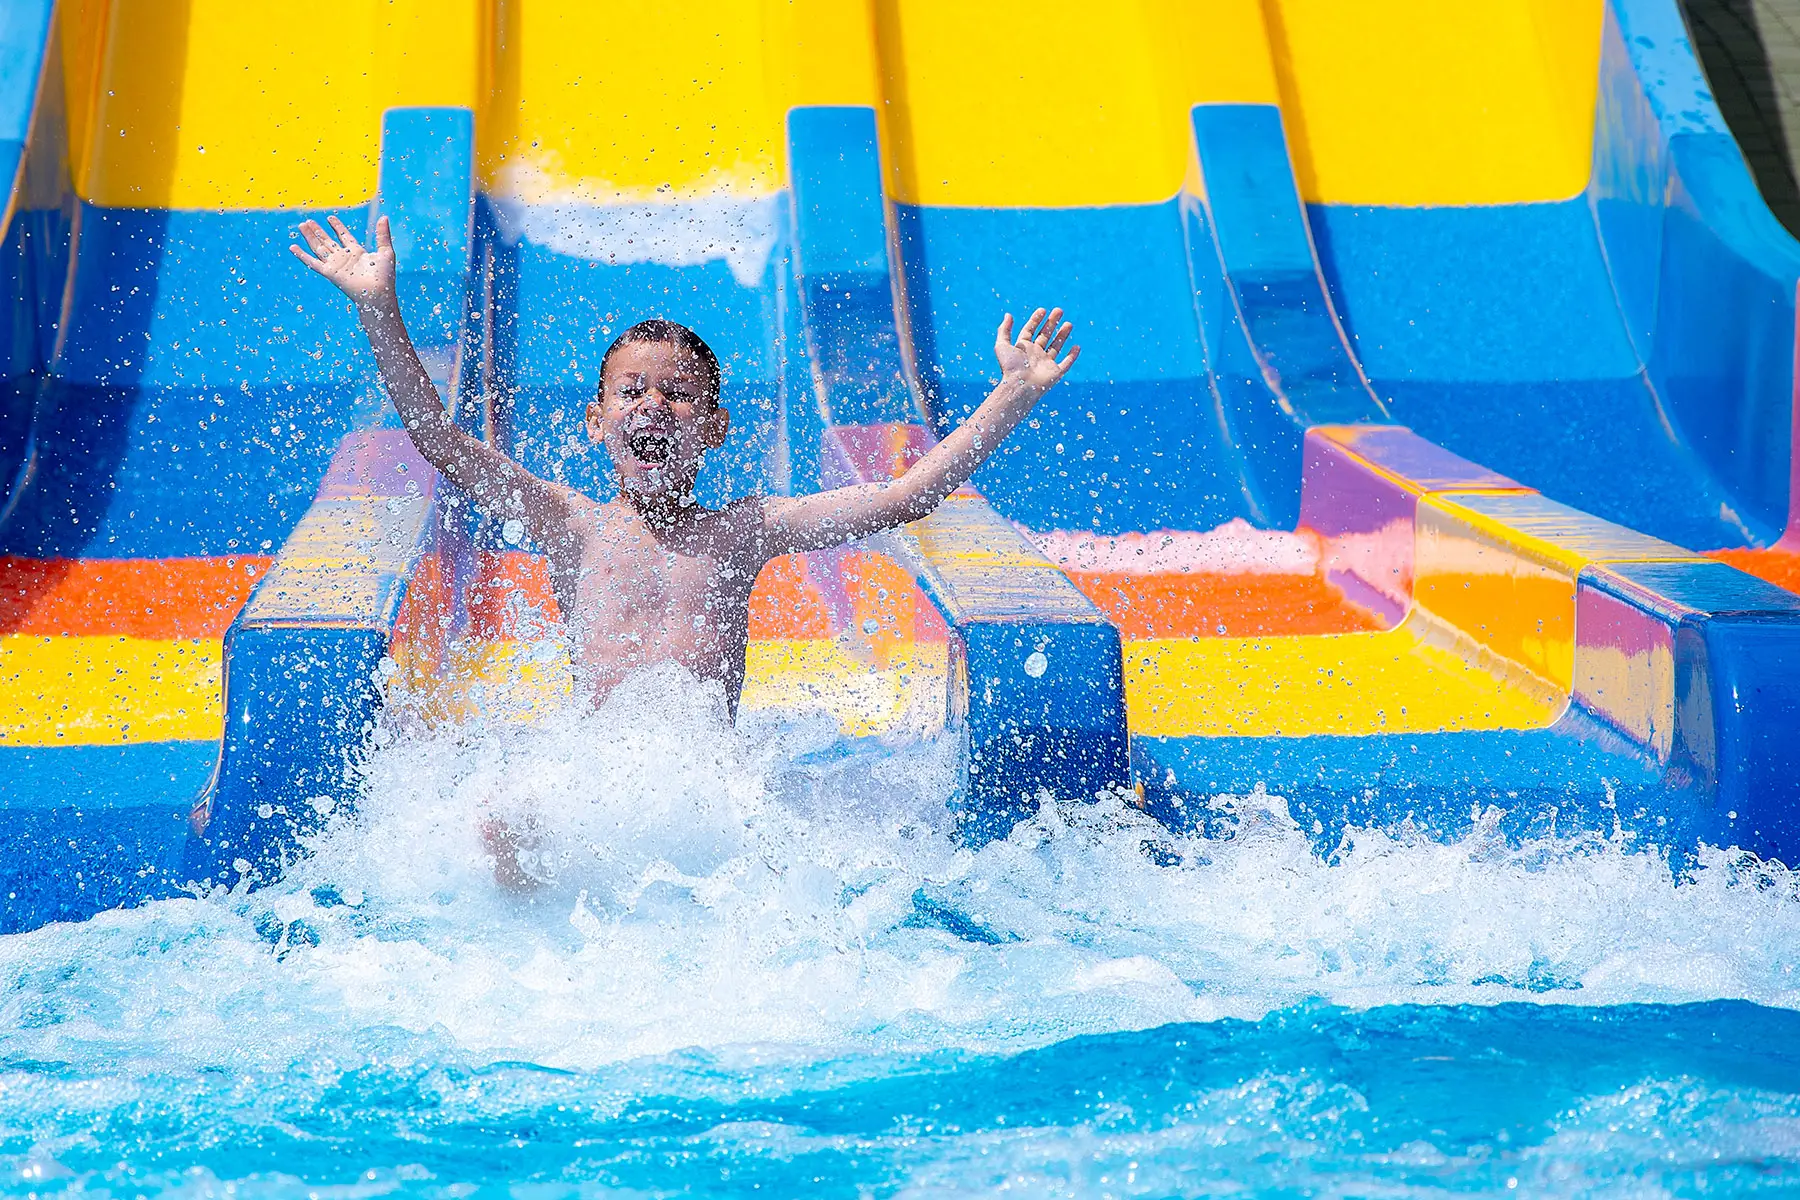 Boy on a slide at a water park